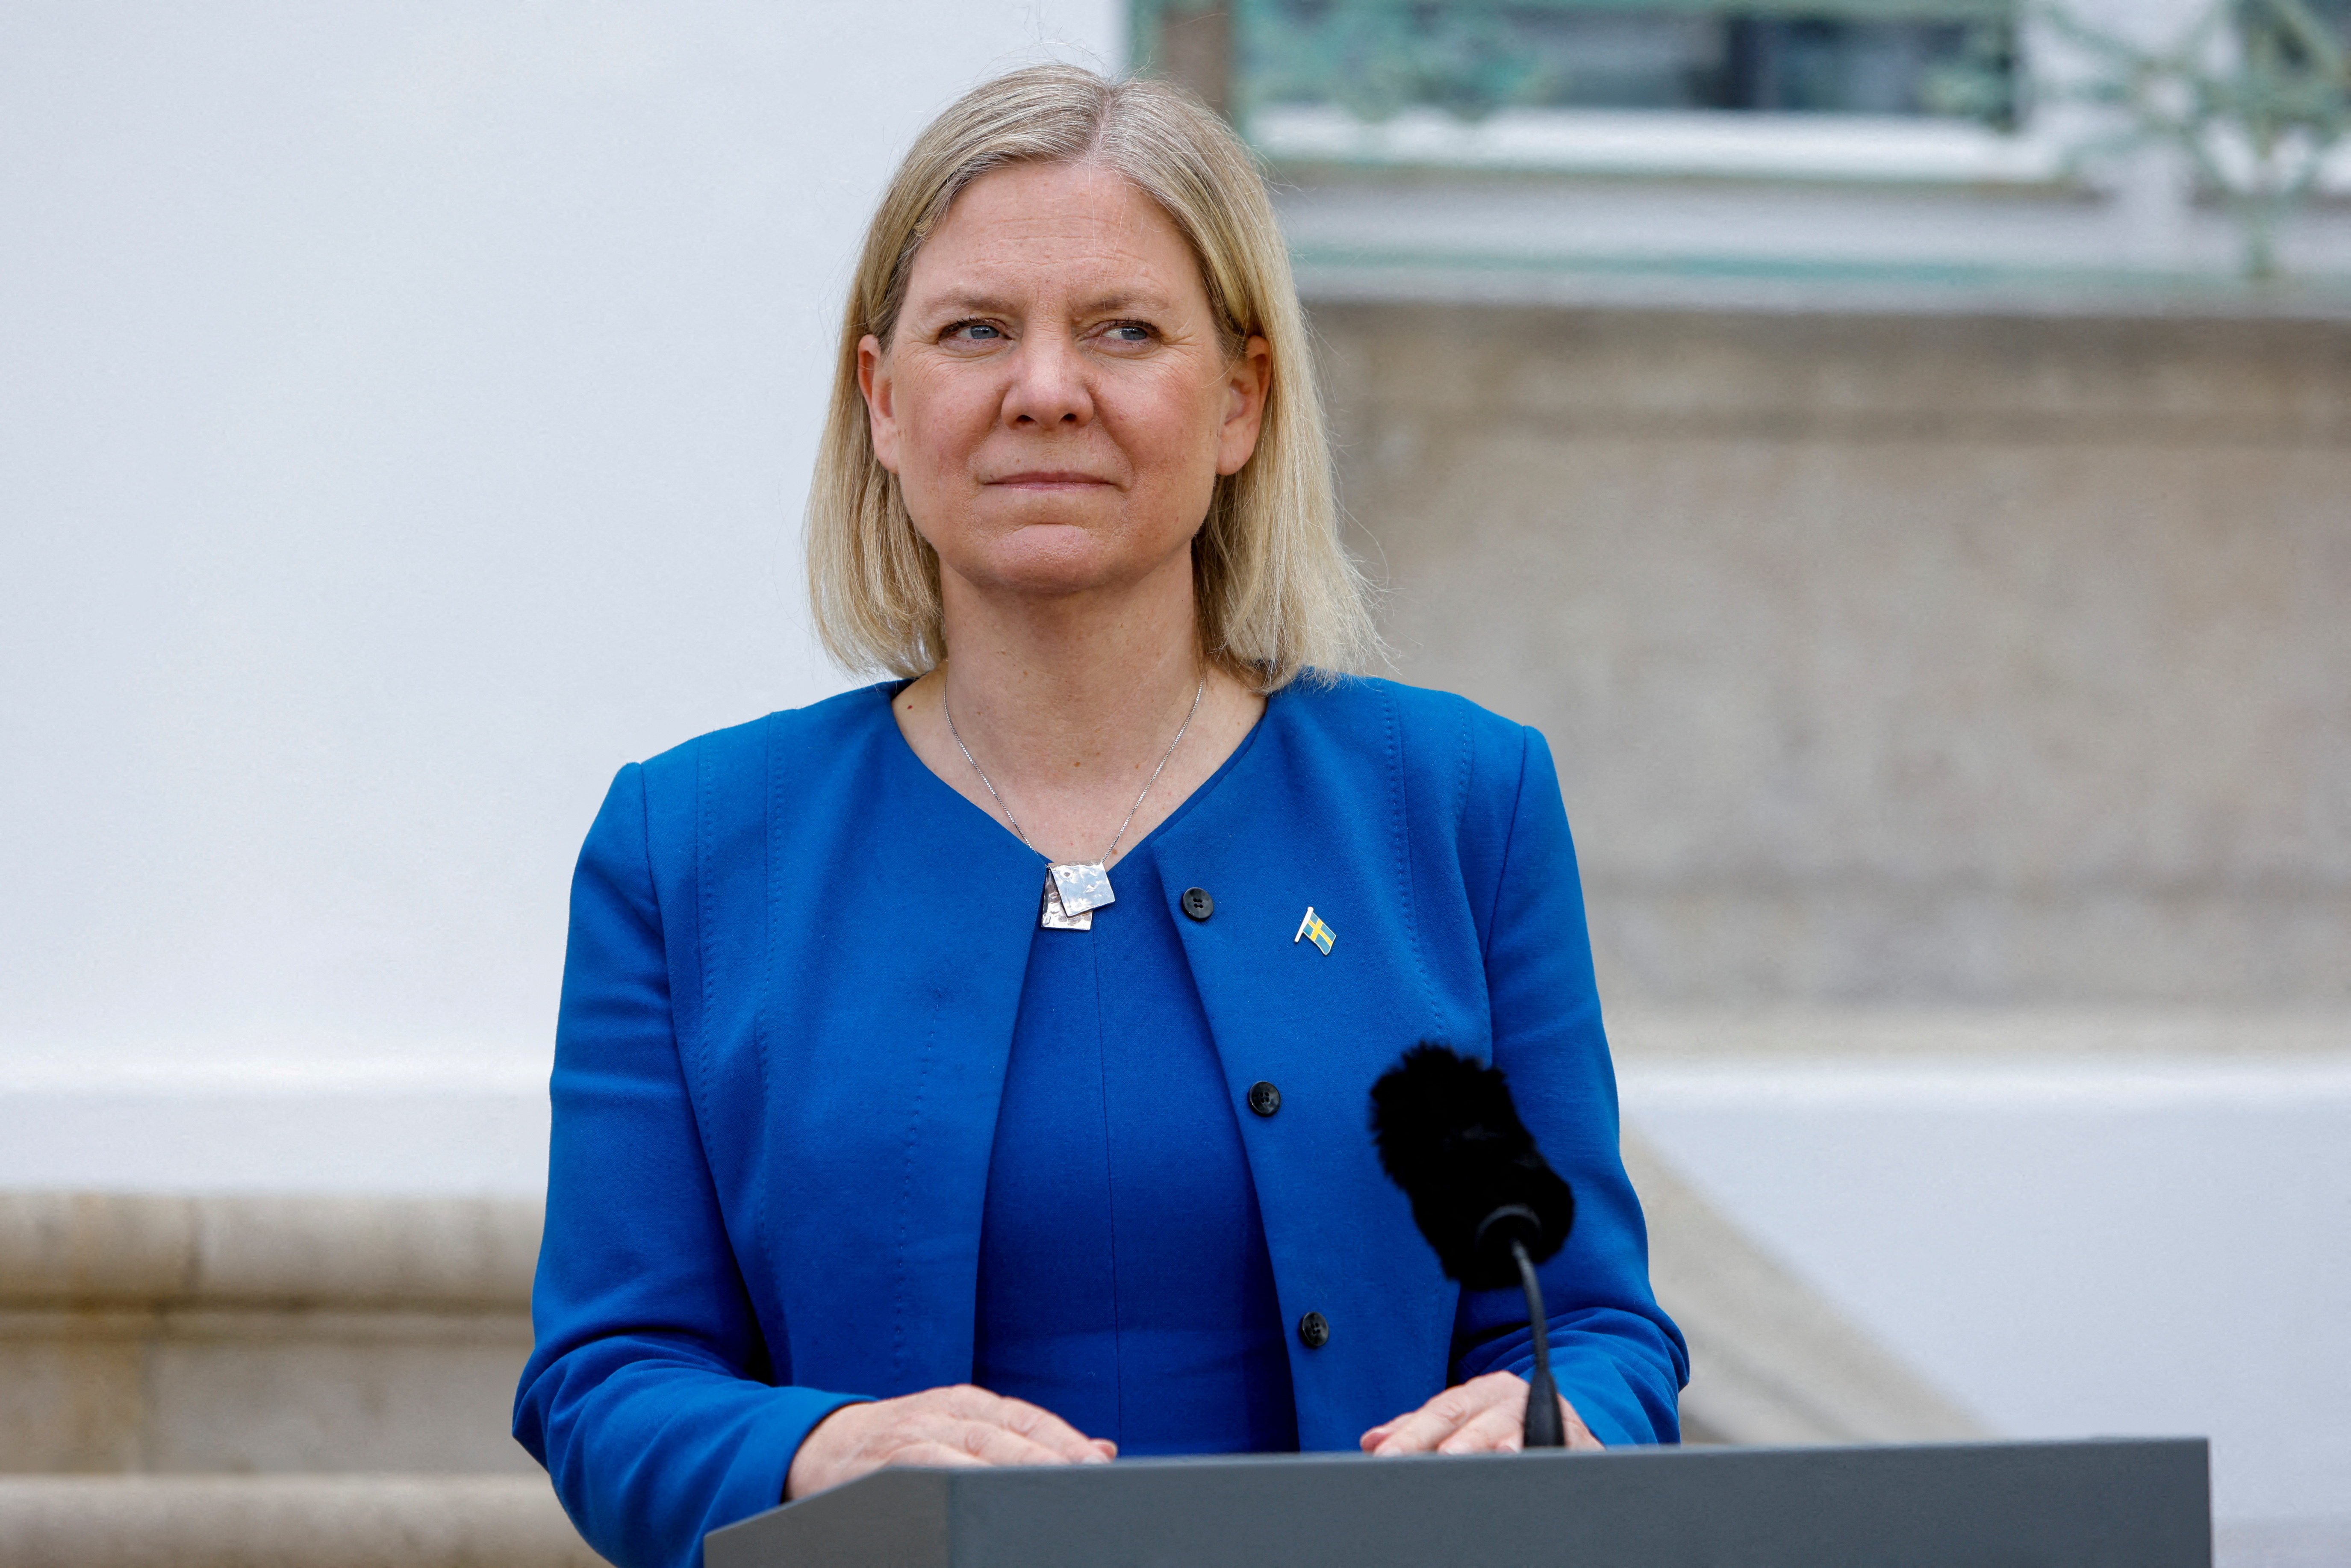 FILE PHOTO: Swedish Prime Minister Magdalena Andersson looks on next to a microphone on the first day of a special German cabinet meeting hosted by Chancellor Olaf Scholz at the government's guest house Schloss Meseberg in Meseberg, Gransee, Ge